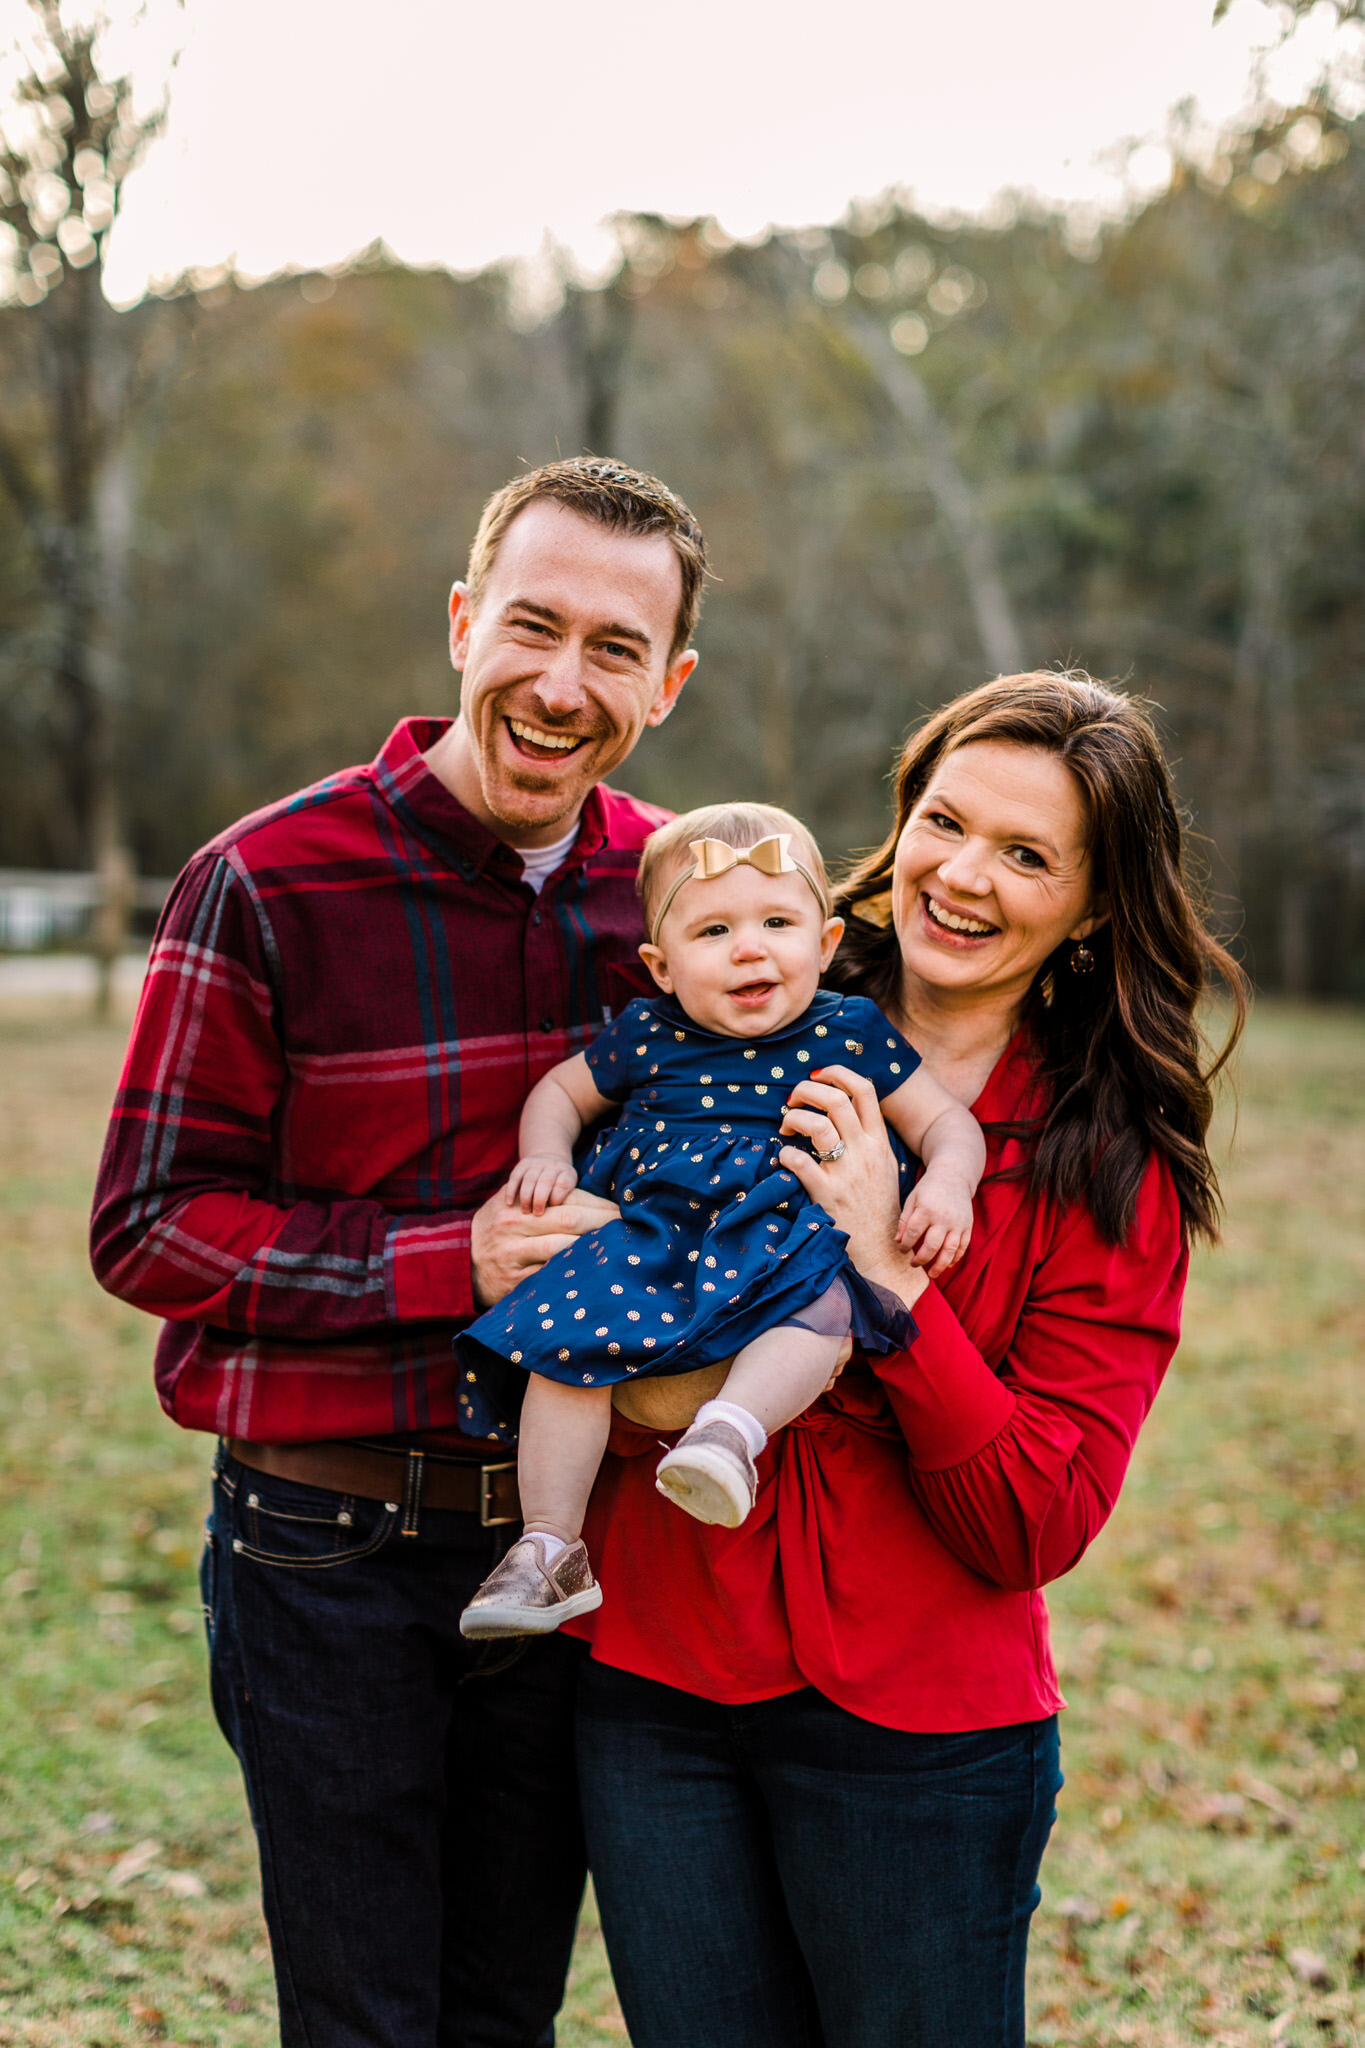 Durham Family Photographer | By G. Lin Photography | Cute winter family photo at West Point on Eno River